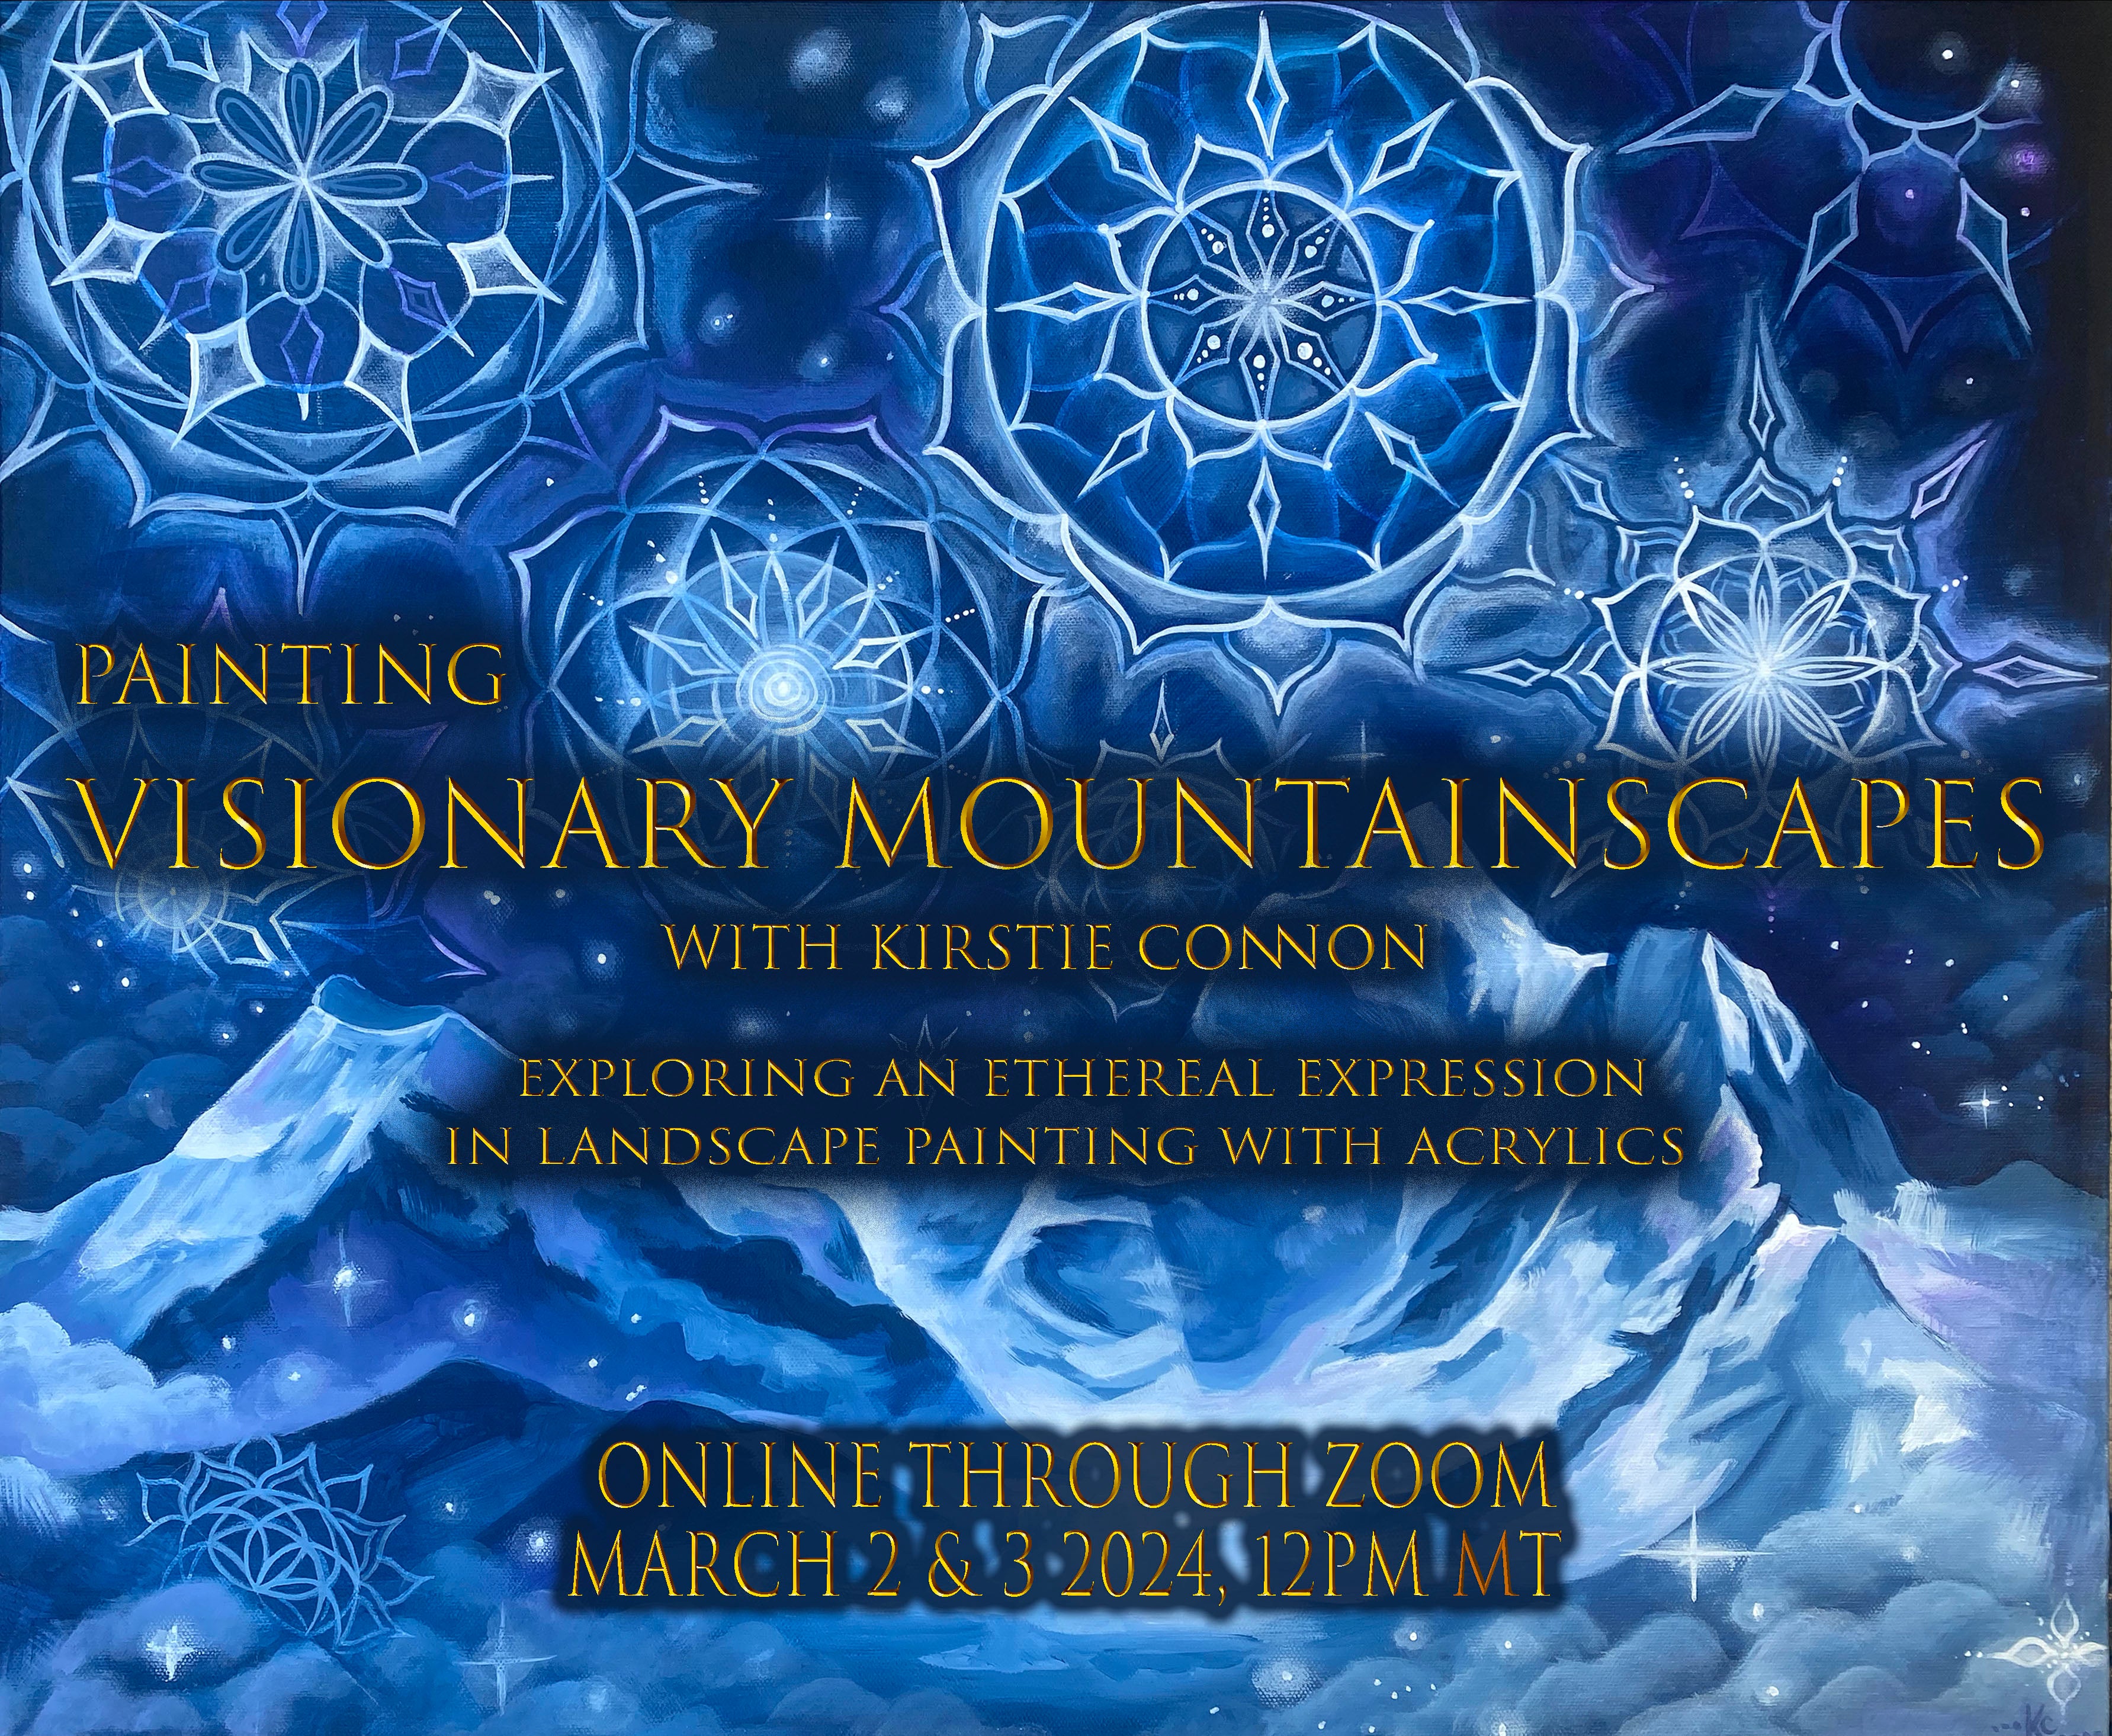 "Painting Visionary Mountainscapes" Online Workshop